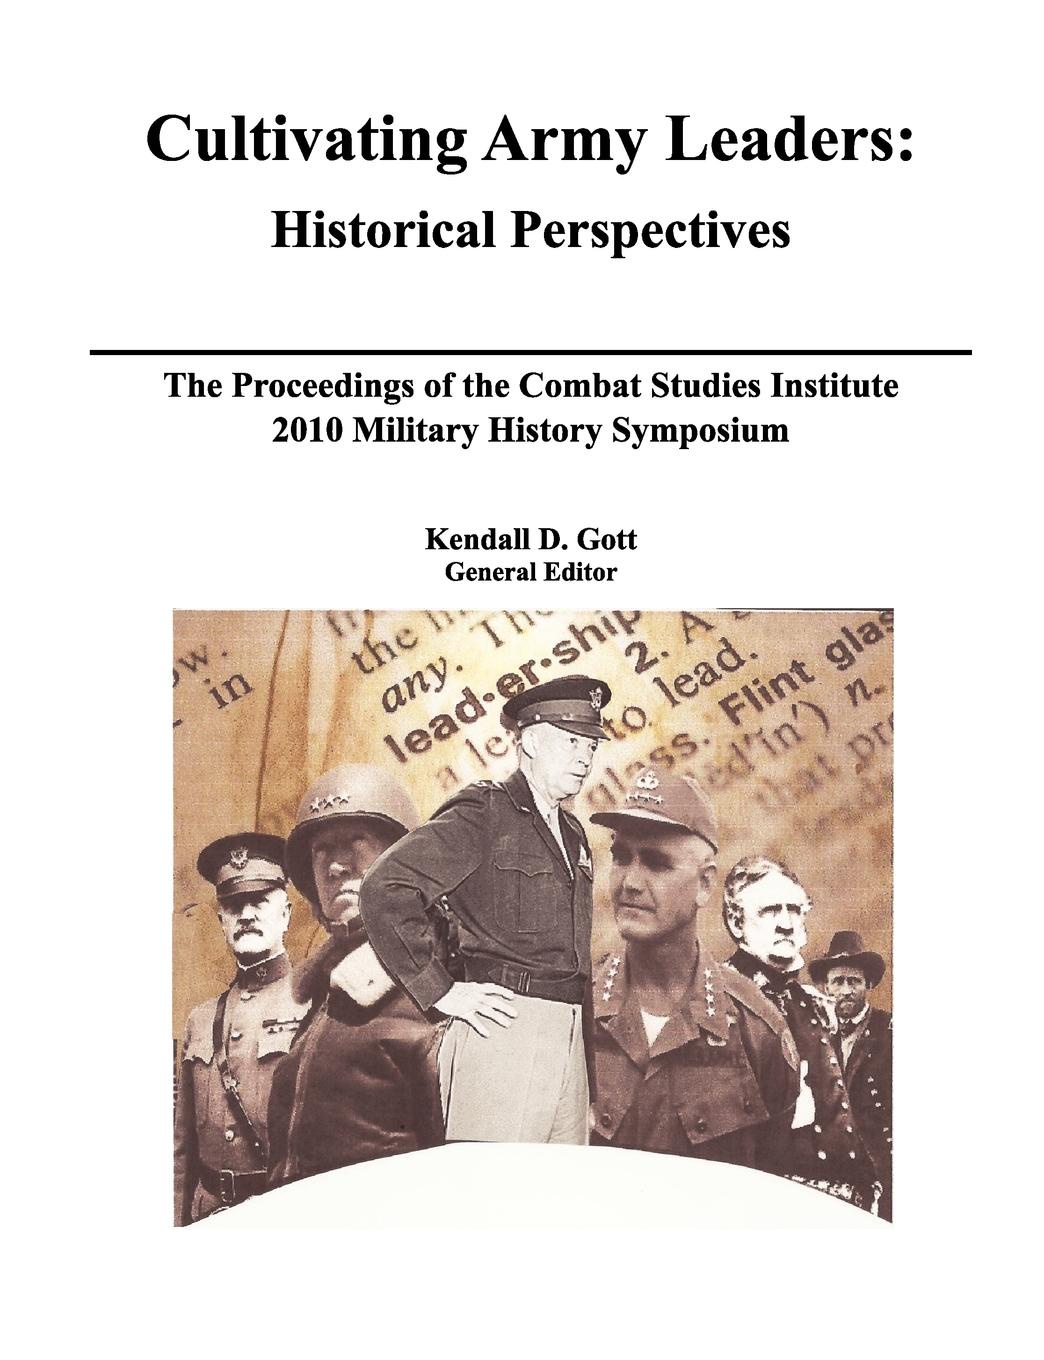 Cultivating Army Leaders. Historical Perspectives. The Proceedings of the Combat Studies Institute 2010 Military History Symposium